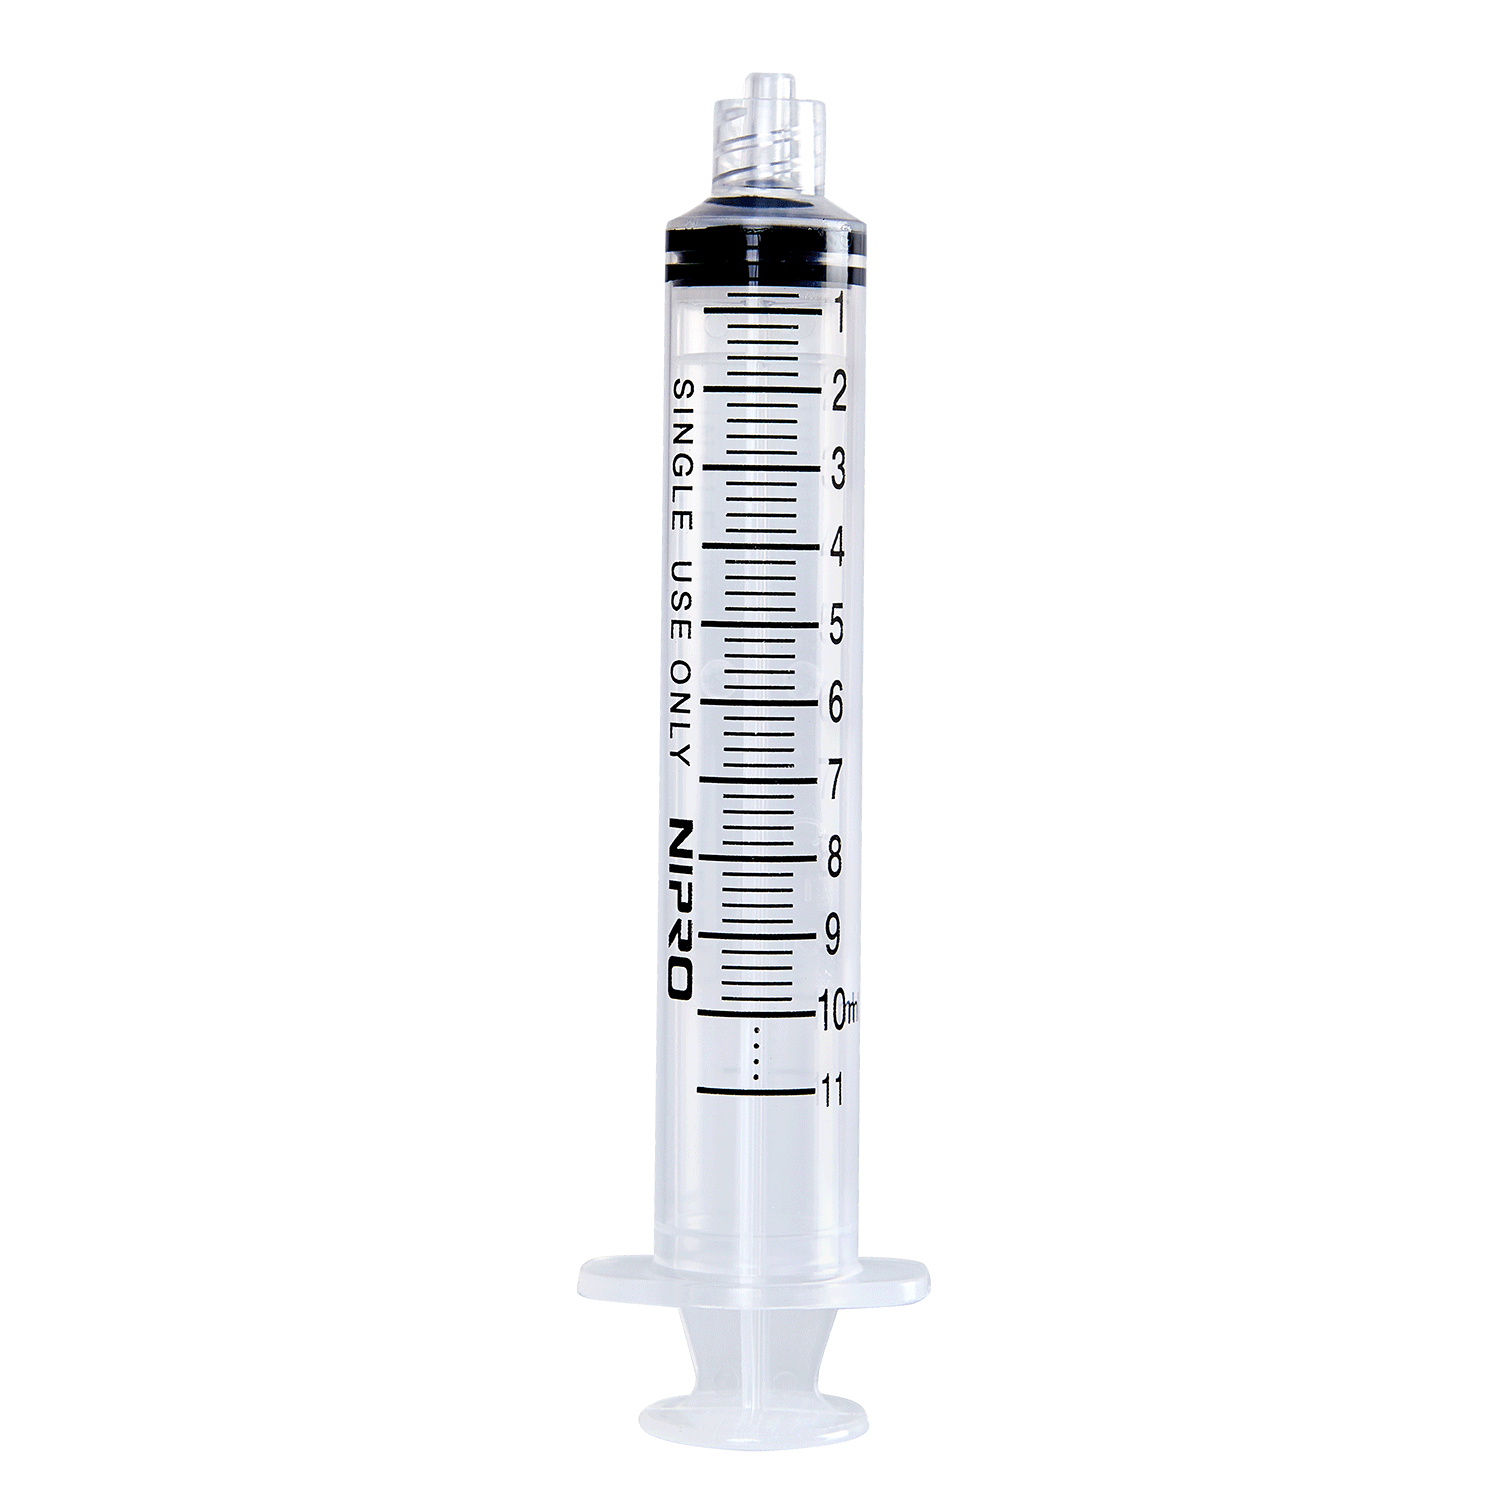 Mixing Syringes with Needles -Exel 3cc OR Nipro 10cc (3 syringes per pack)